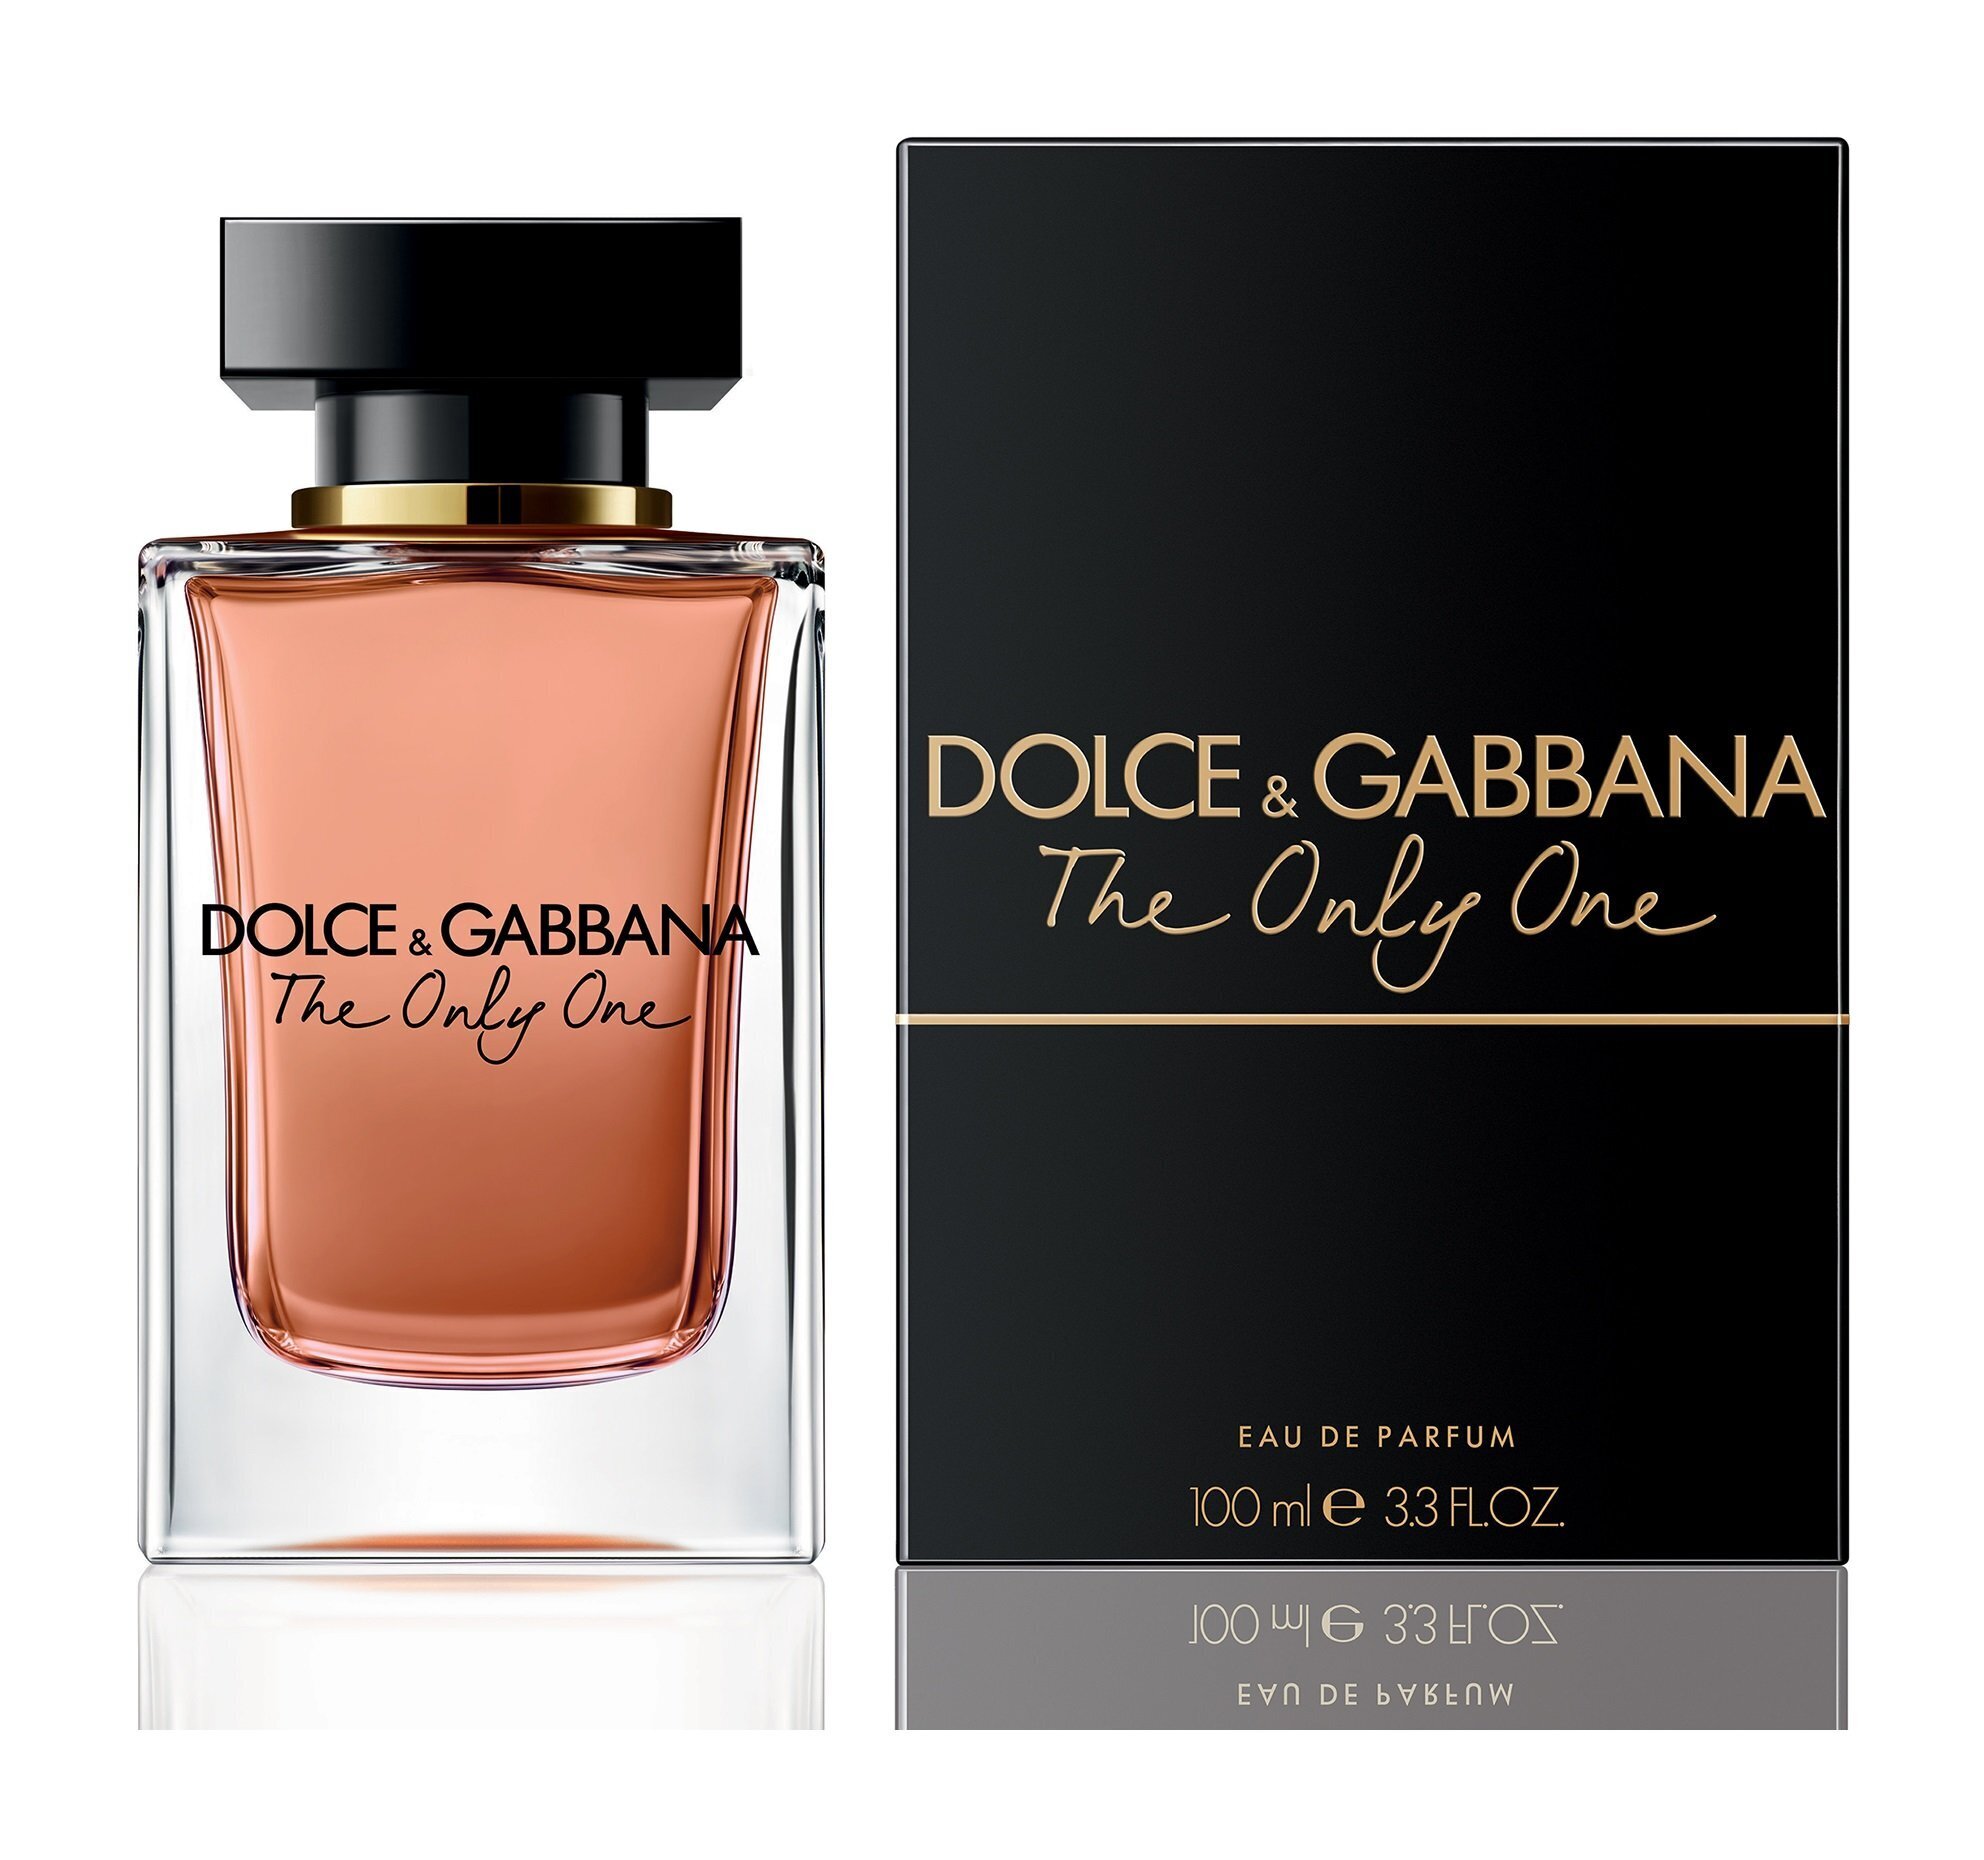 Dolce & Gabbana the only one, EDP., 100 ml. Dolce & Gabbana the only one EDP 50 ml. Dolce Gabbana the only one 100ml. Dolce Gabbana the only one 50ml. Дольче габбана кью отзывы